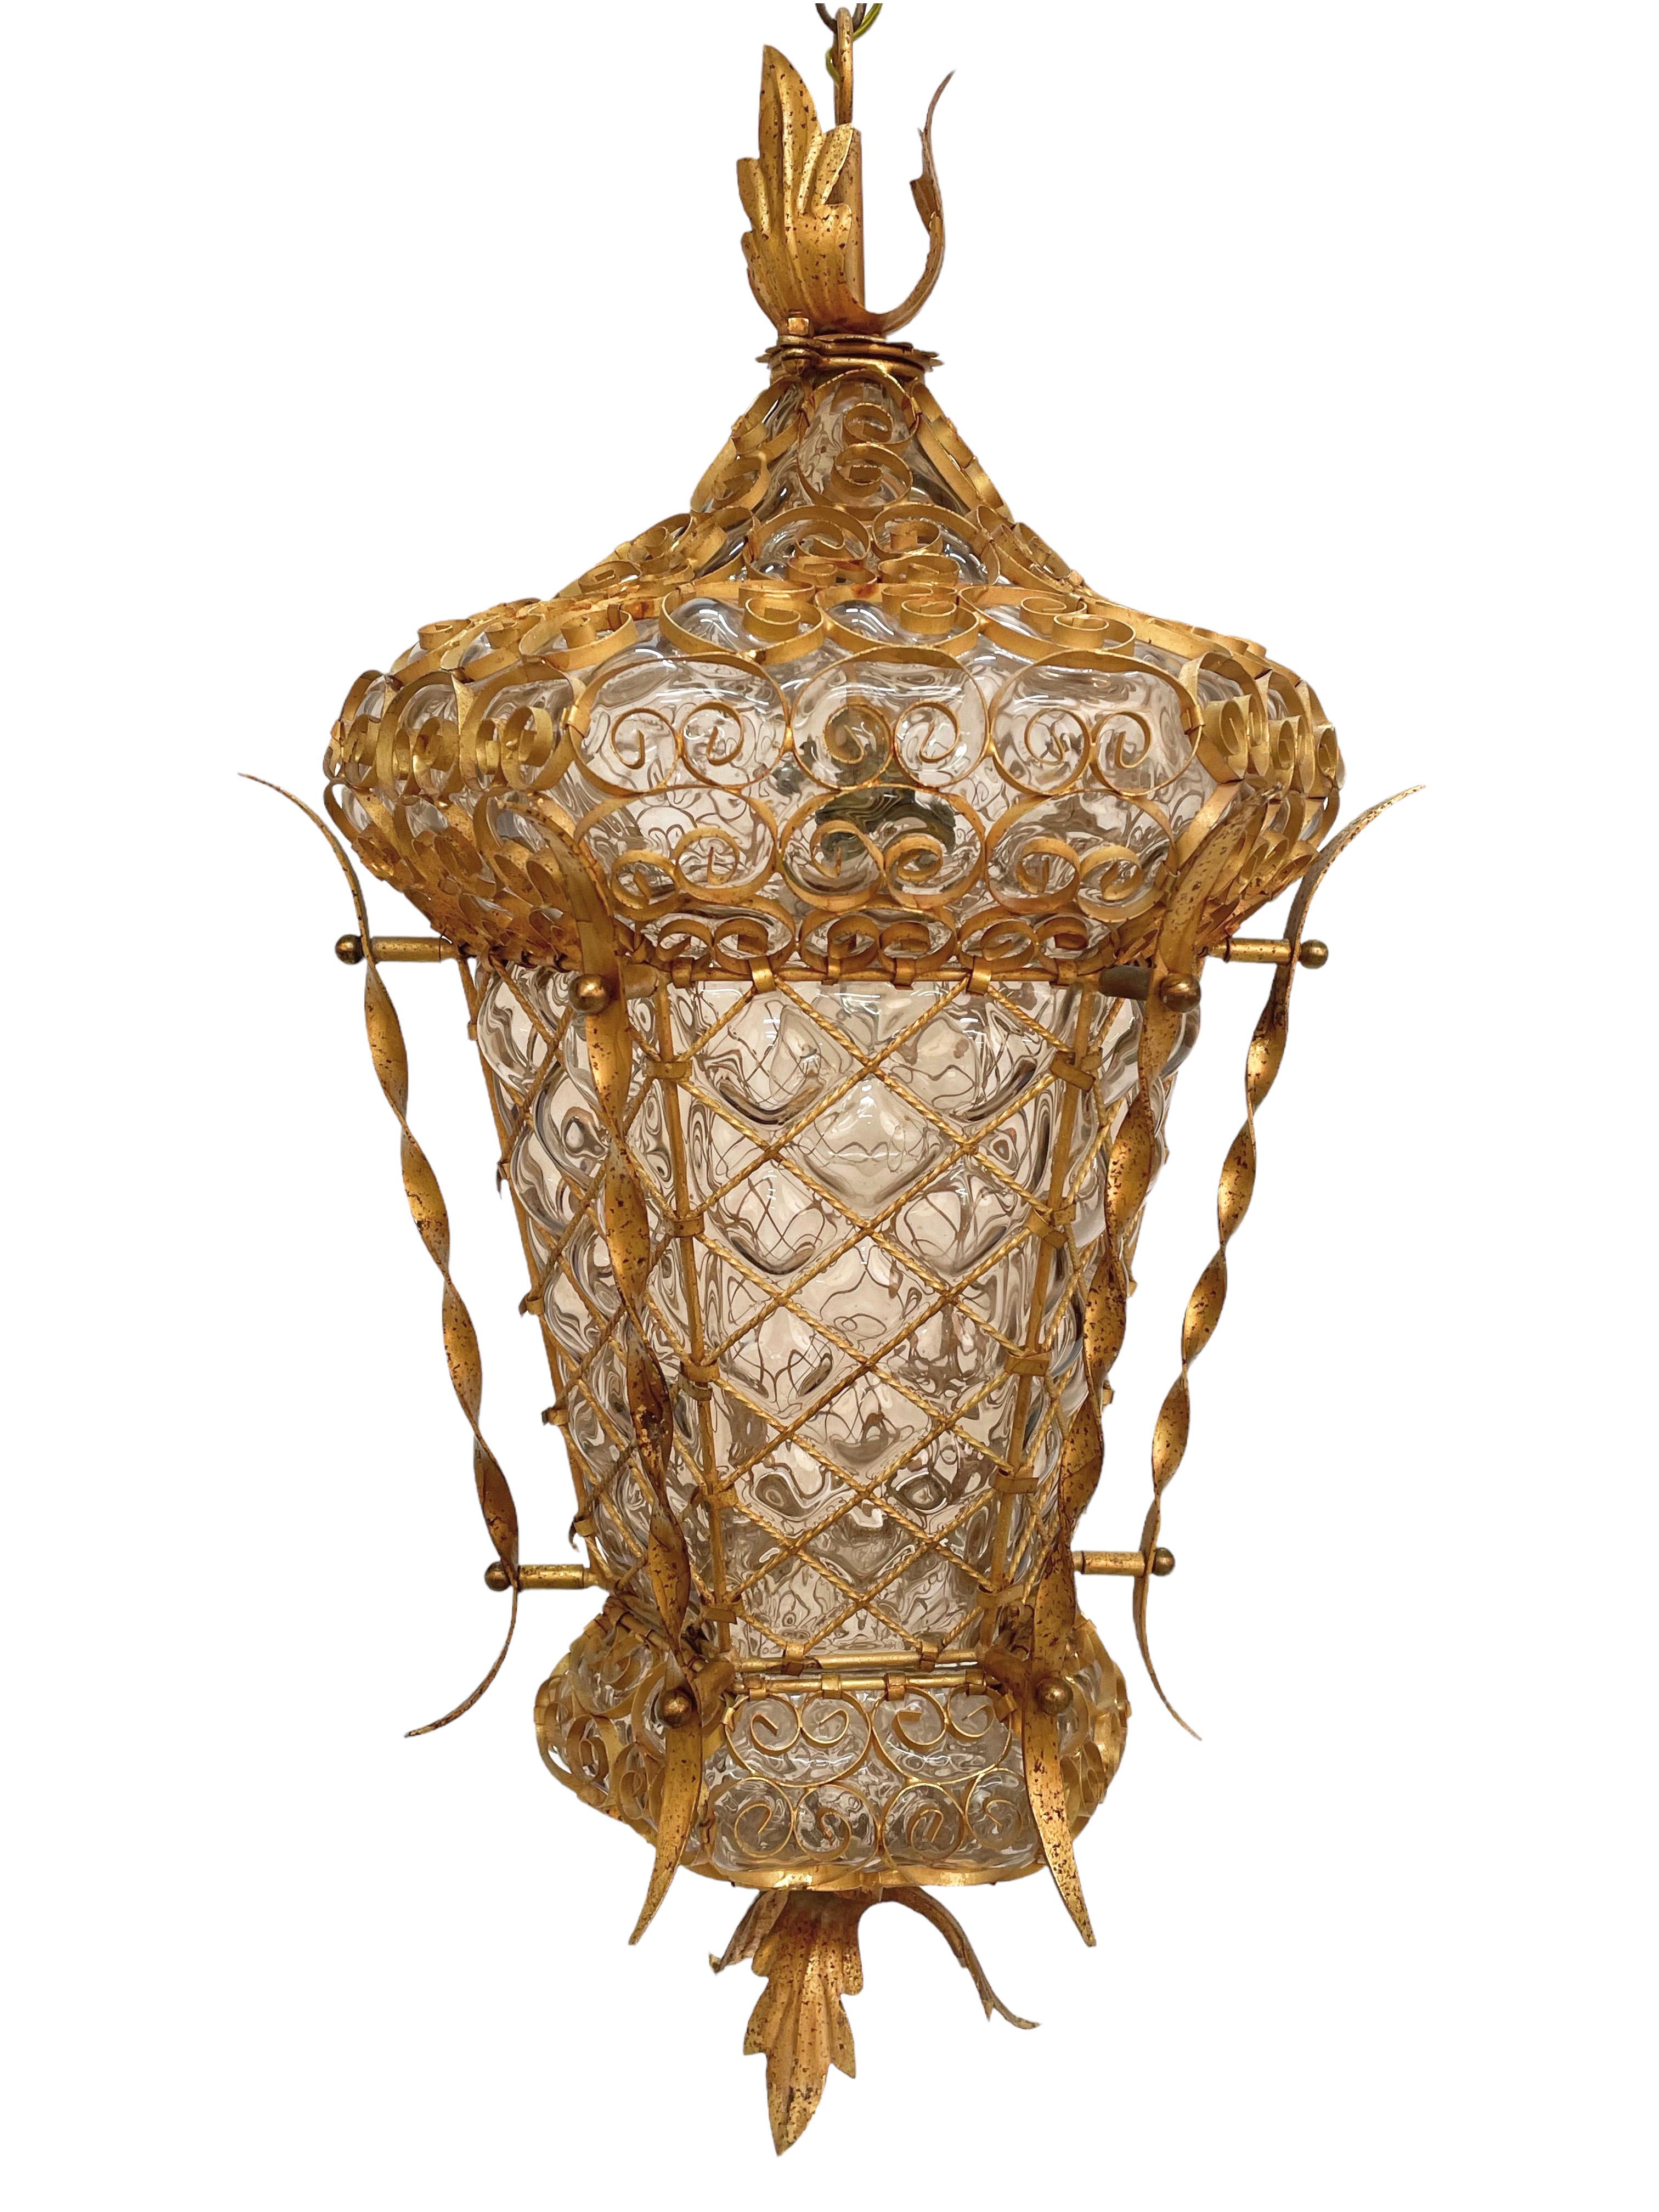 Incredible Venetian lantern in blown glass perfectly and symmetrically in the golden wrought iron structure.
This exceptional piece was designed in Italy in the 1940s.

This chandelier is incredible for the accuracy in the decoration of the iron